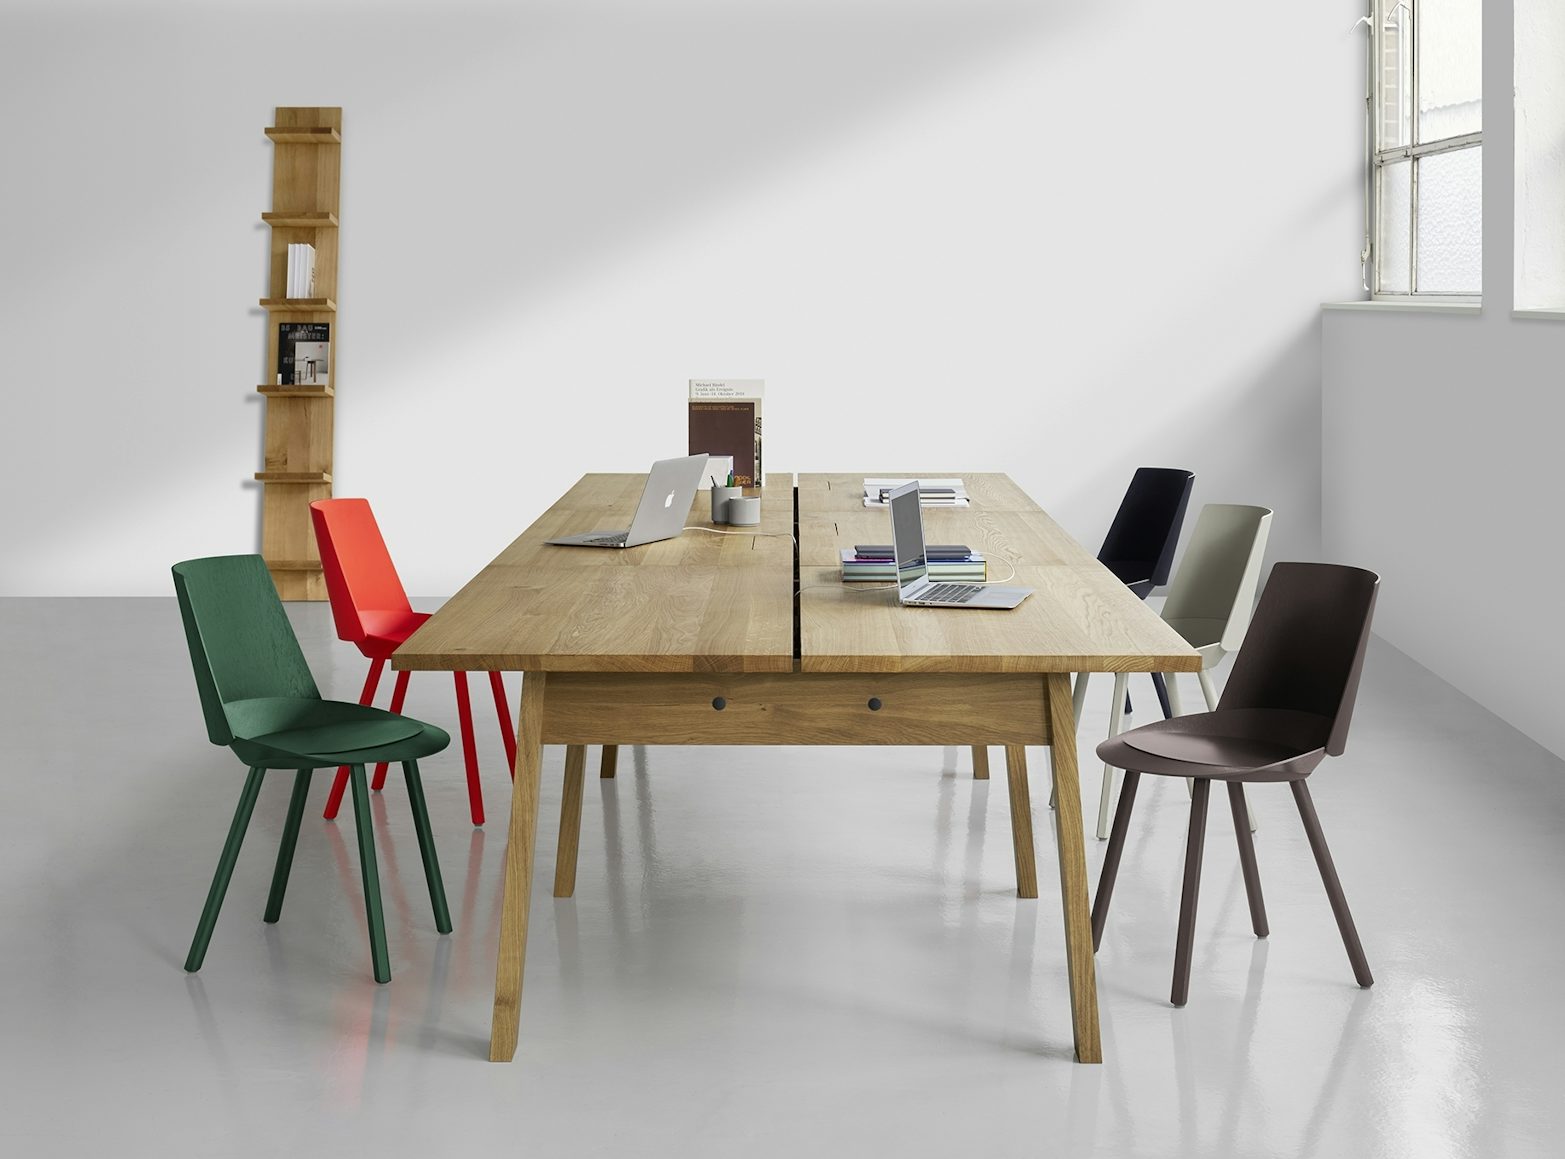 basis workstation with houdini chairs and mate shelf by e15 furniture